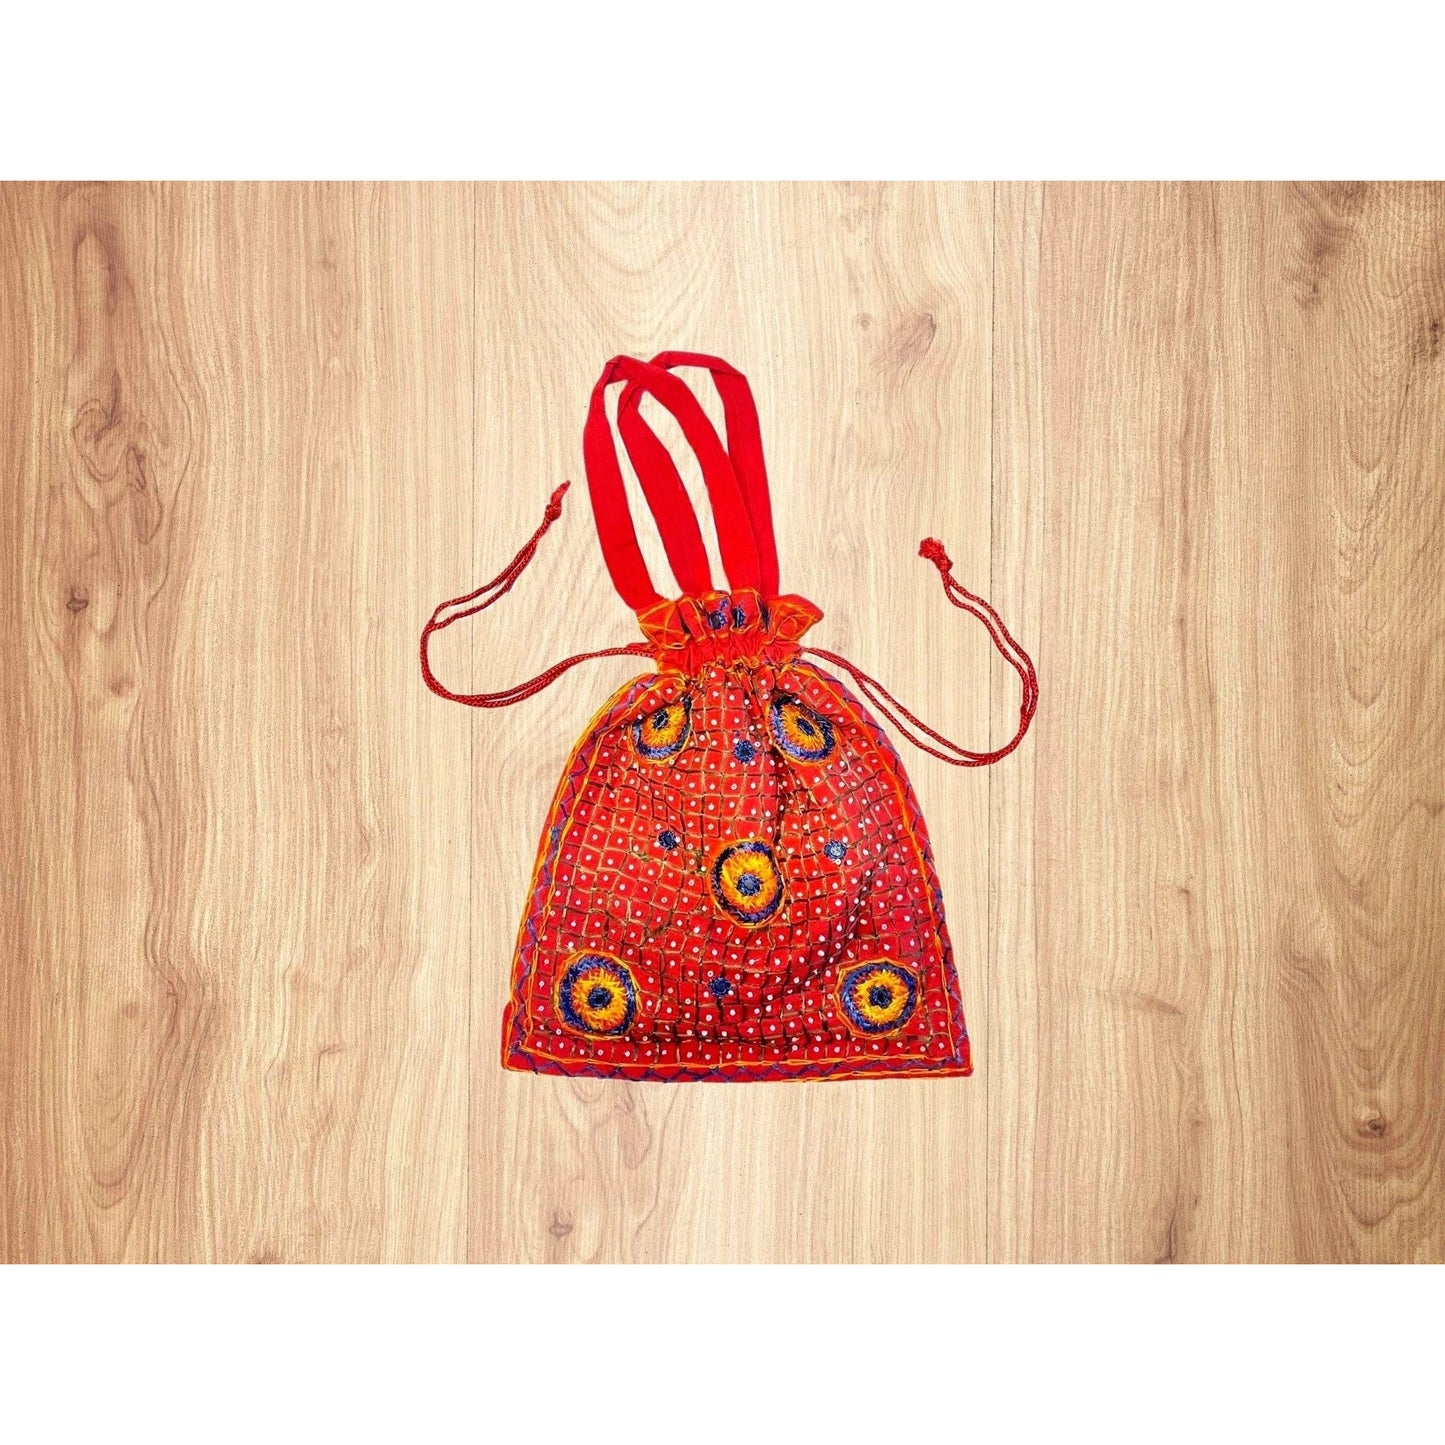 Embroidered Mirror Bag with Circles - Hand Made